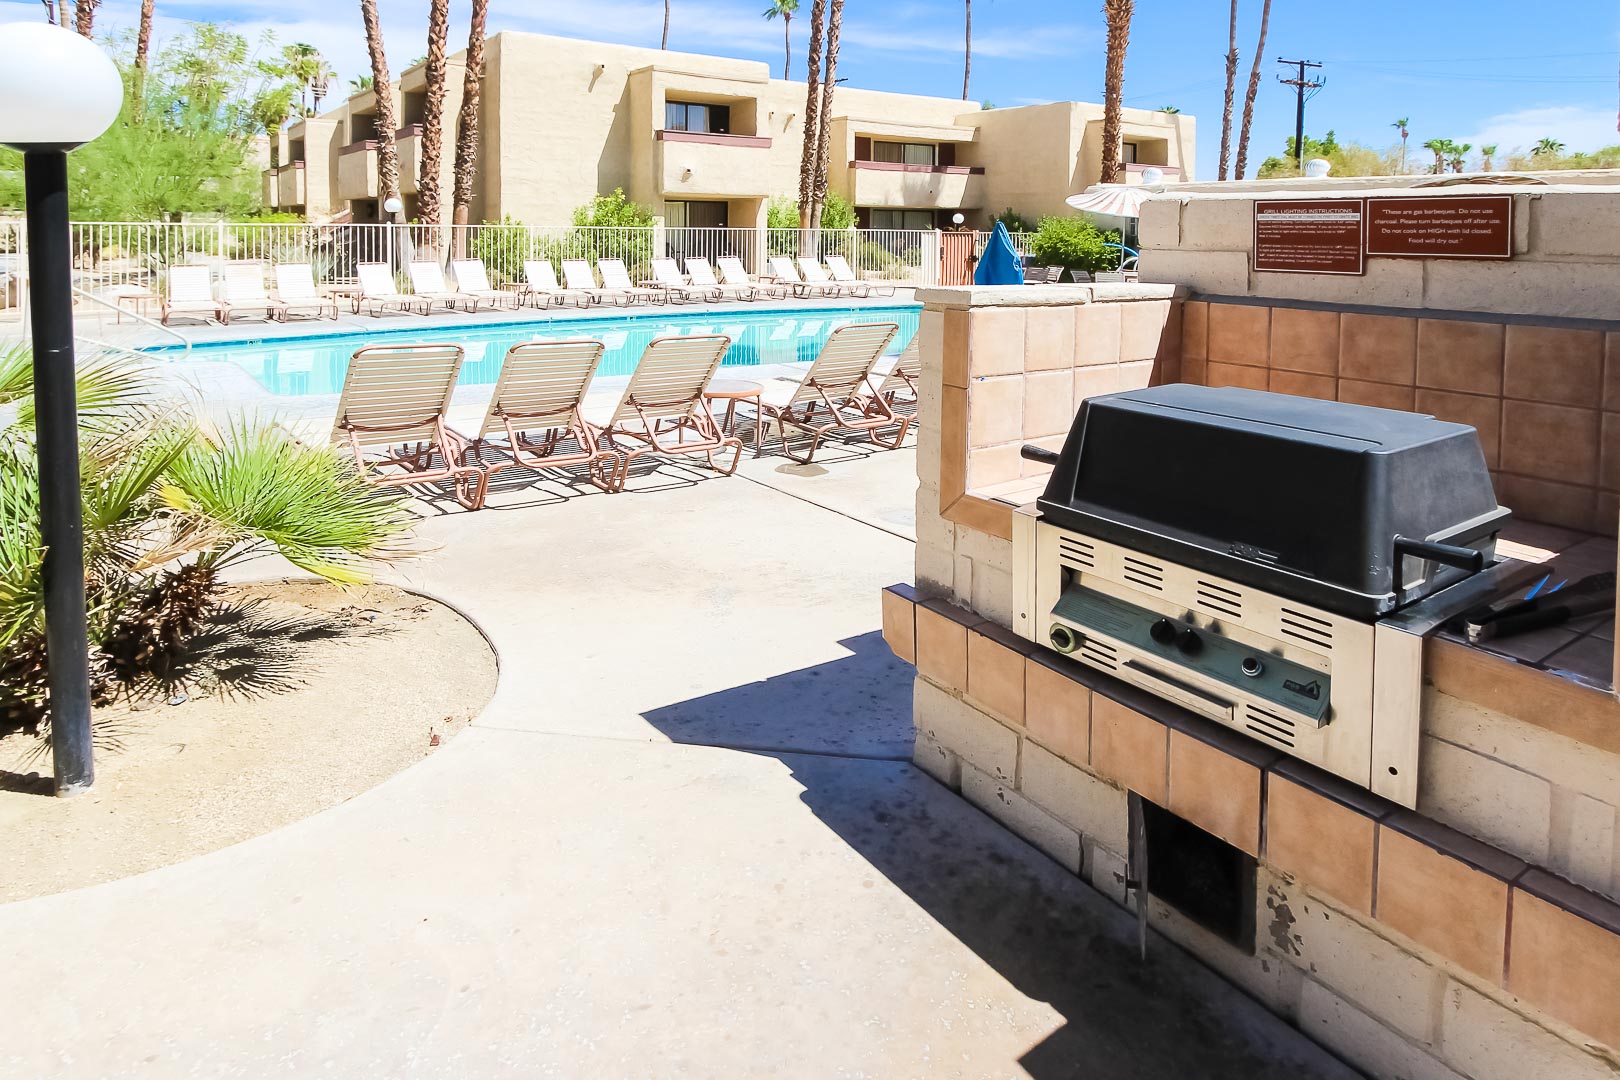 BBQ Grills next to the outdoor swimming pool at VRI's Desert Vacation Villas in Palm Springs California.